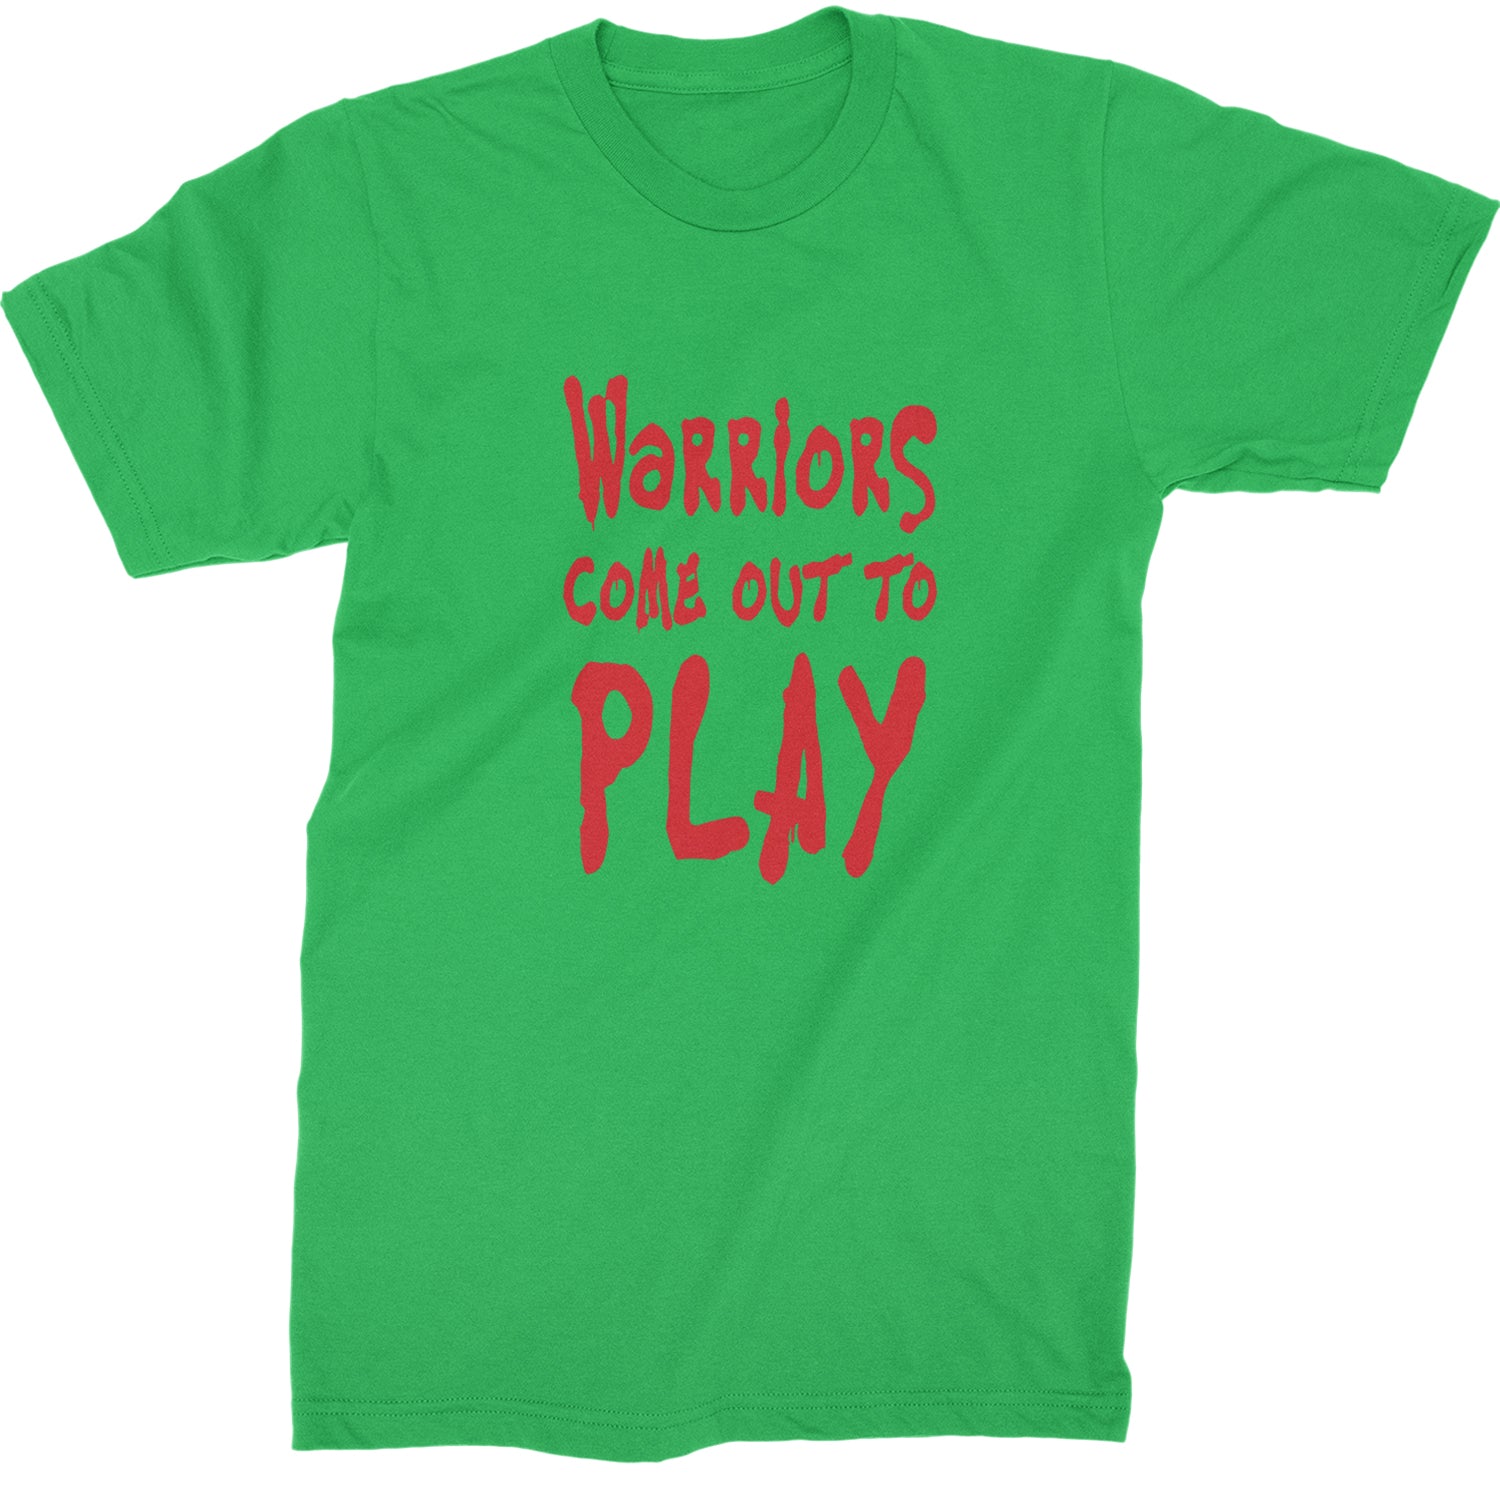 Warriors Come Out To Play  Mens T-shirt Kelly Green